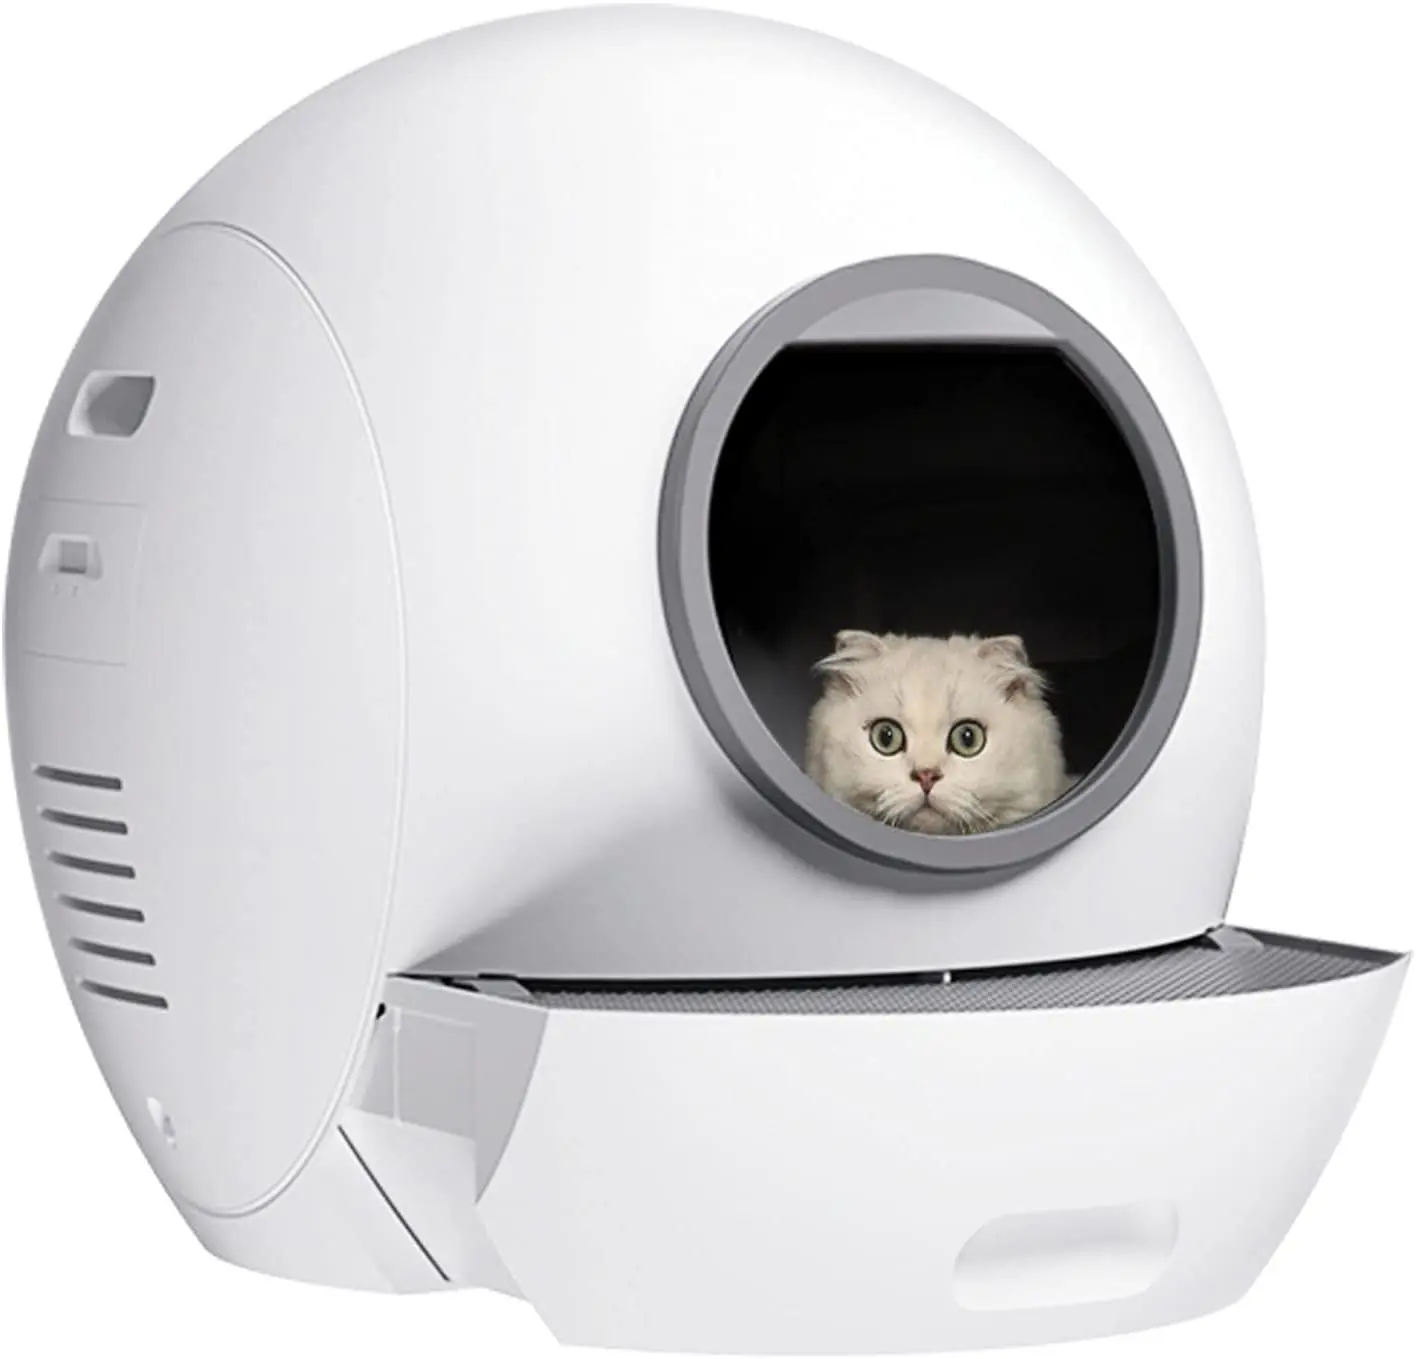 

Smart Fully Enclosed Quick Cleaning Cats Litter Toilet UV Light APP Remote Control Auto Self-cleaning Automatic Cat Litter Box